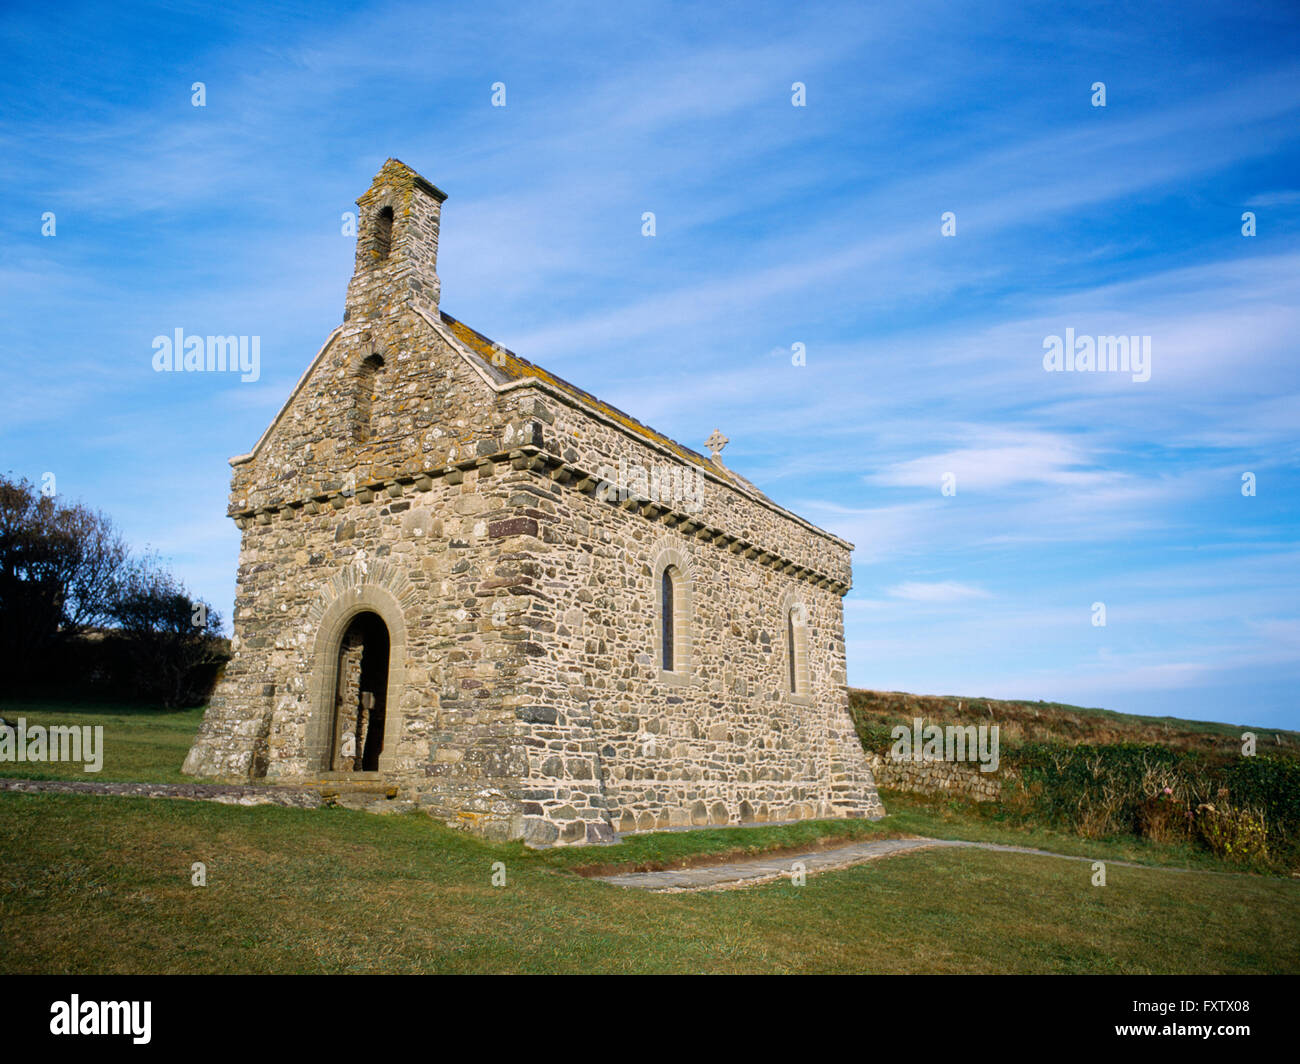 Celtic-style Chapel of Our Lady and St Non, built 1930 close to the medieval St Non's Well and ruined chapel, St David's, Pembrokeshire, Wales, UK Stock Photo